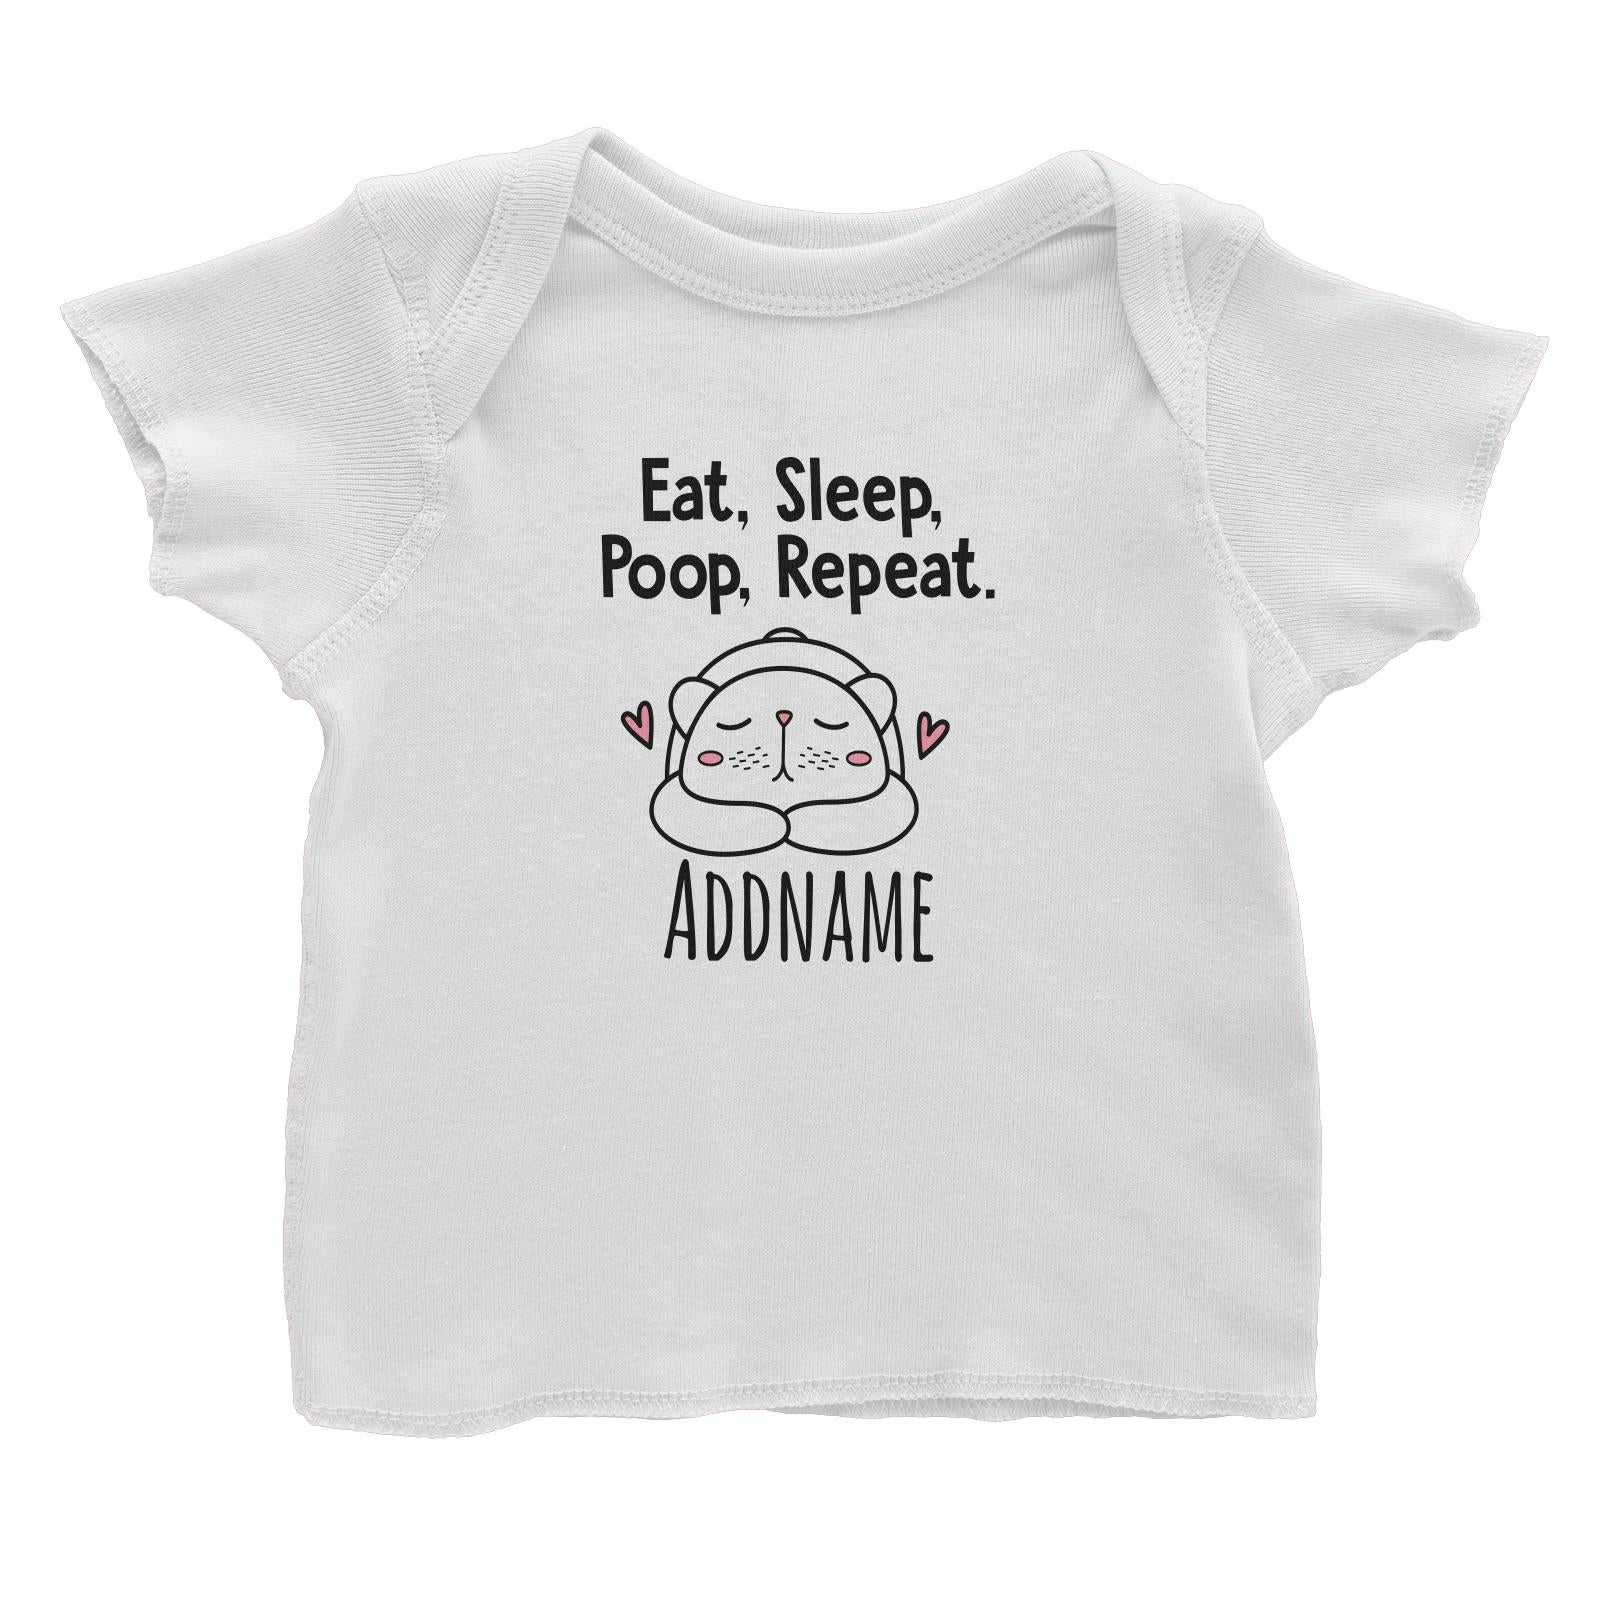 Drawn Baby Elements Eat, Sleep, Poop, Repeat Bear Addname Baby T-Shirt